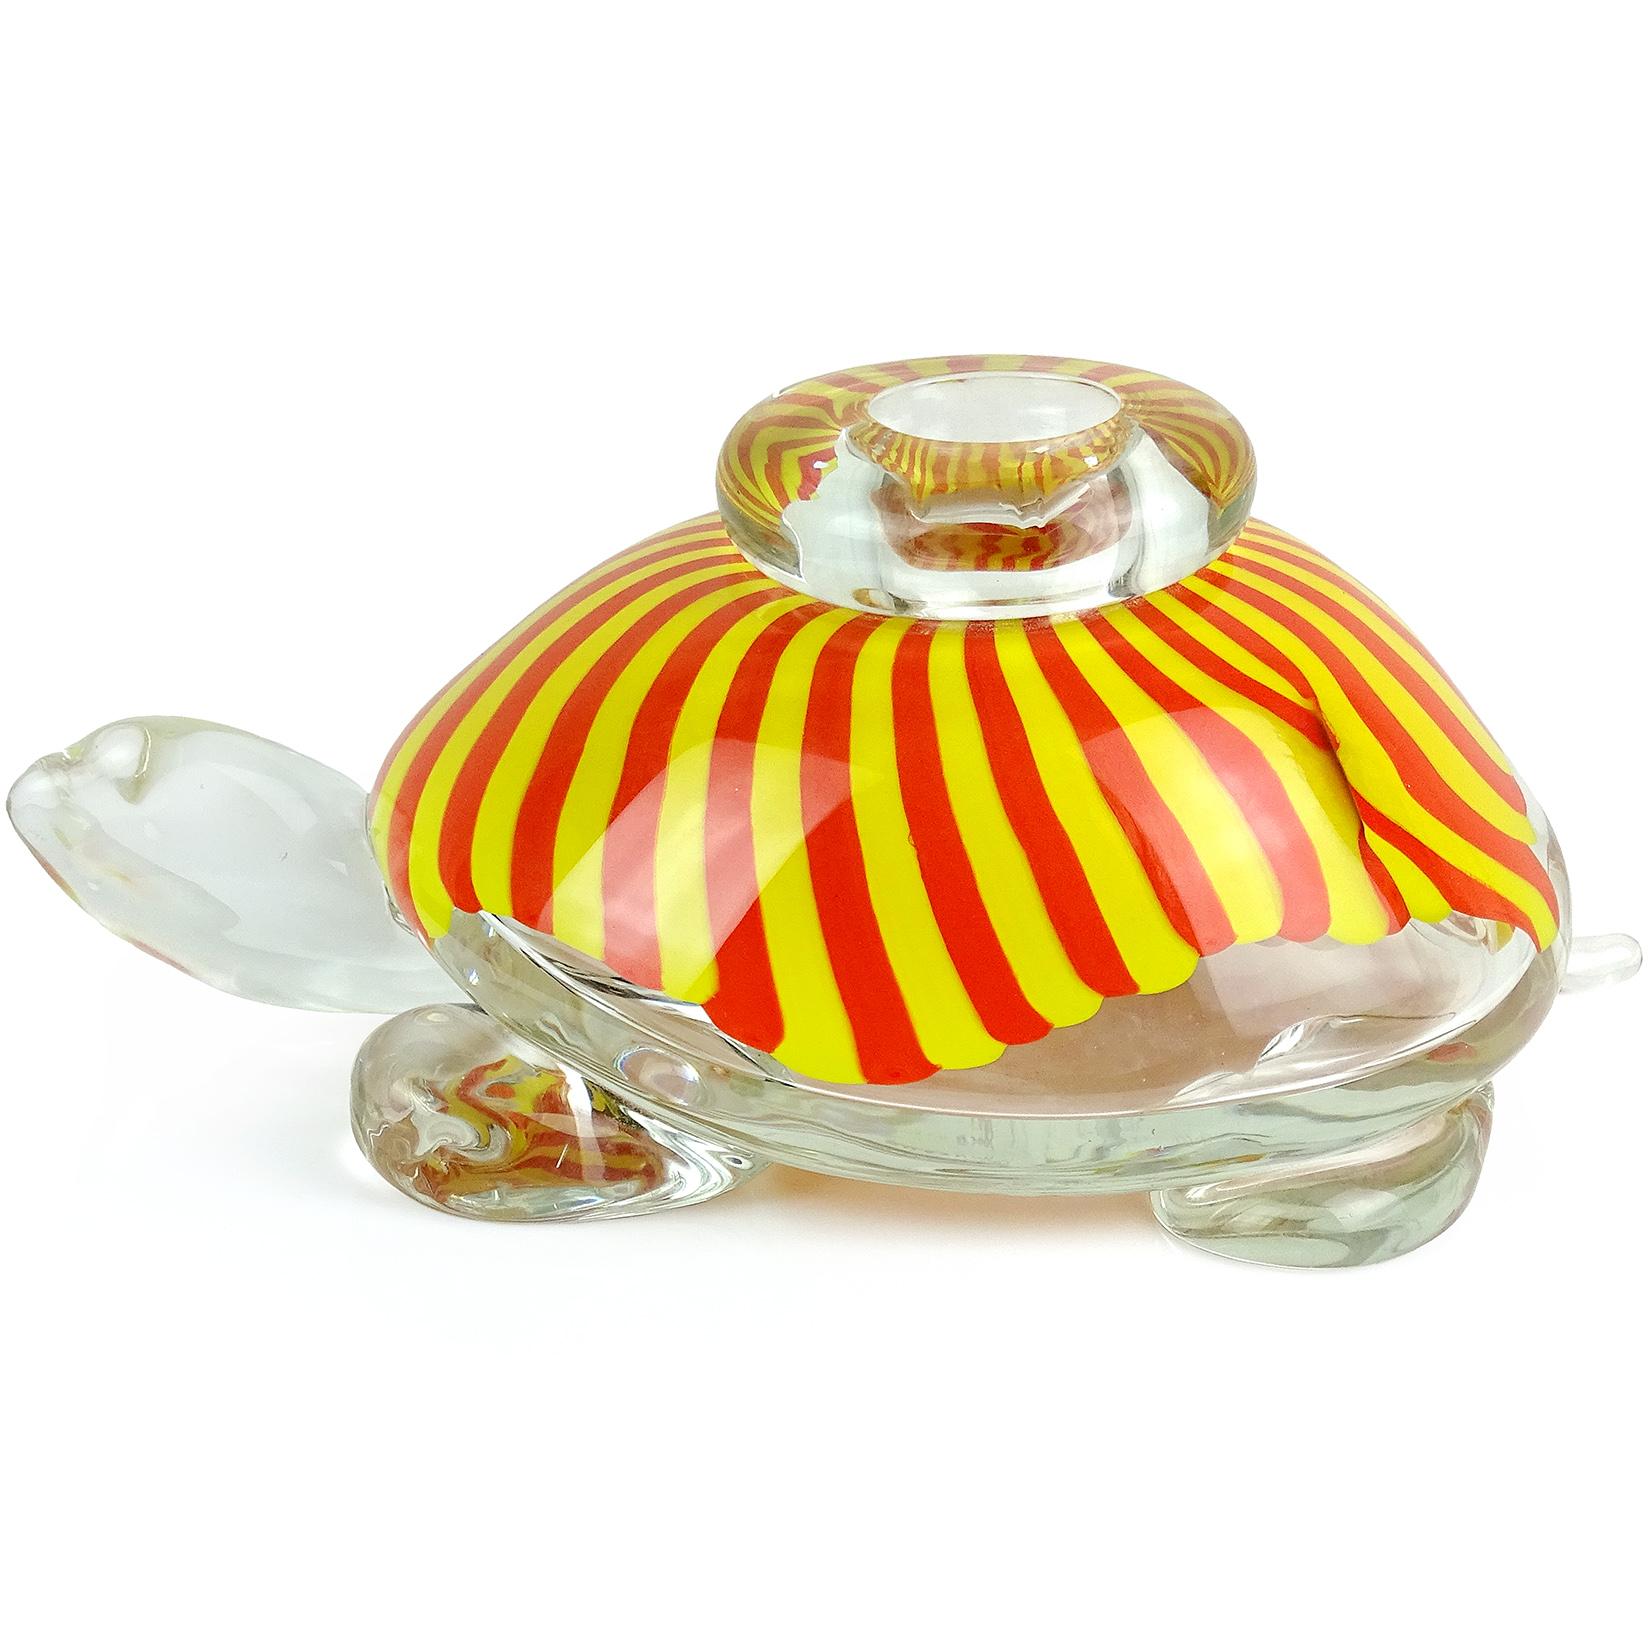 Beautiful Murano handblown yellow and orange stripes shell Italian art glass sculptural turtle vase / centrepiece. Documented and signed Seguso Viro Murano underneath. The piece is very large with thick glass and heavy. Has an applied clear ring on